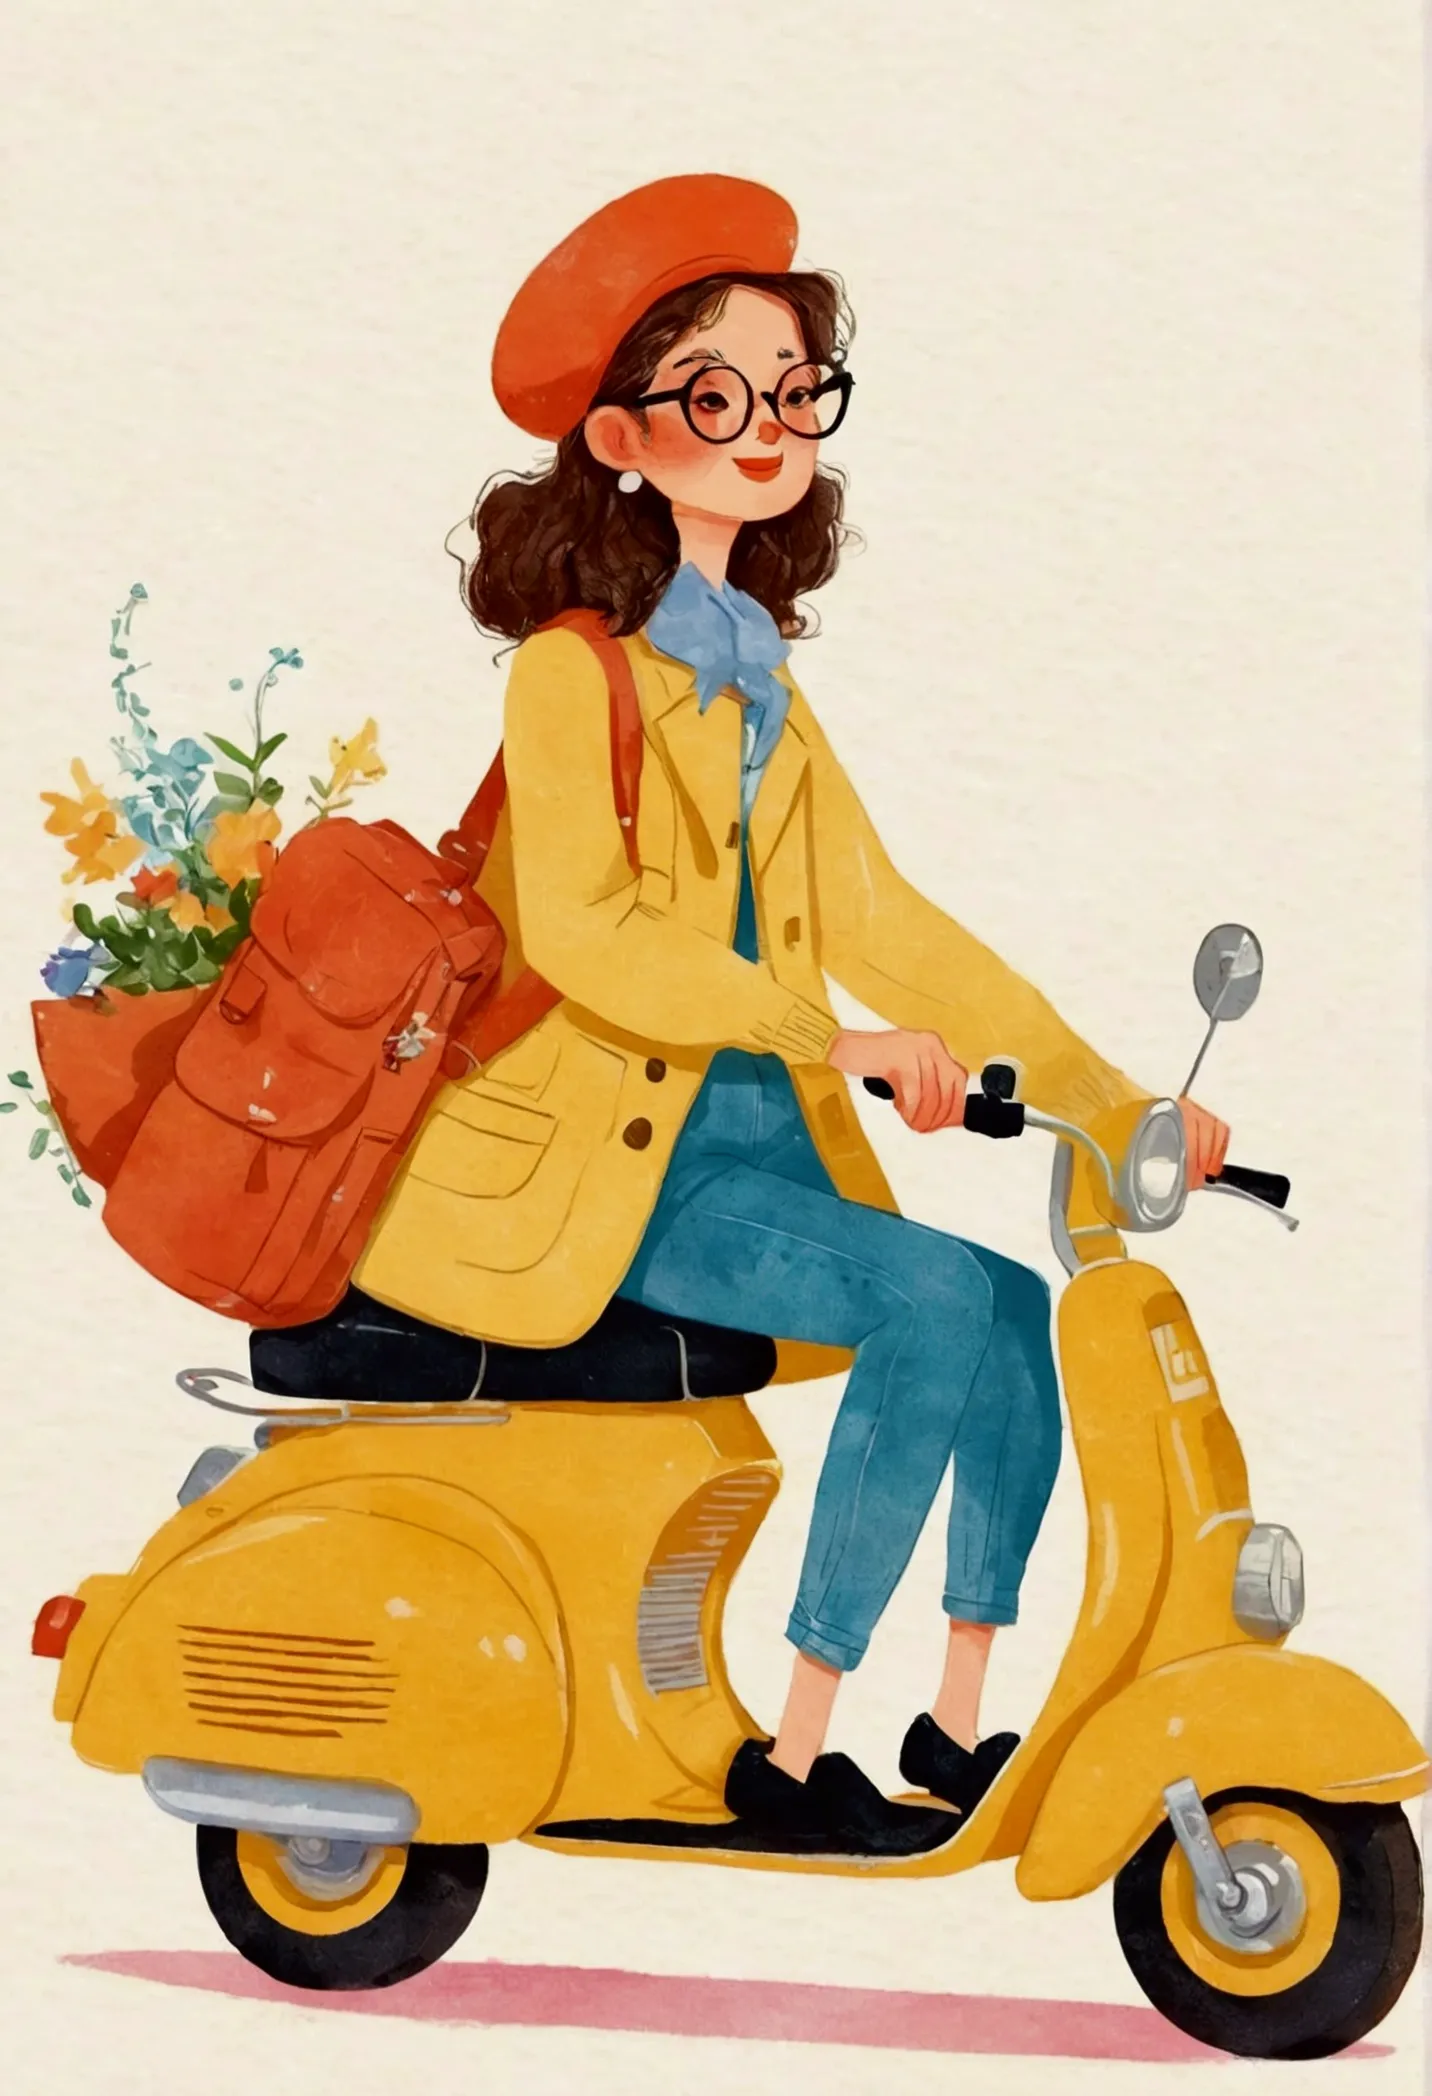 illustration of a woman riding a scooter with a bag on the back, illustration style, in style of digital illustration, by Kaya F...